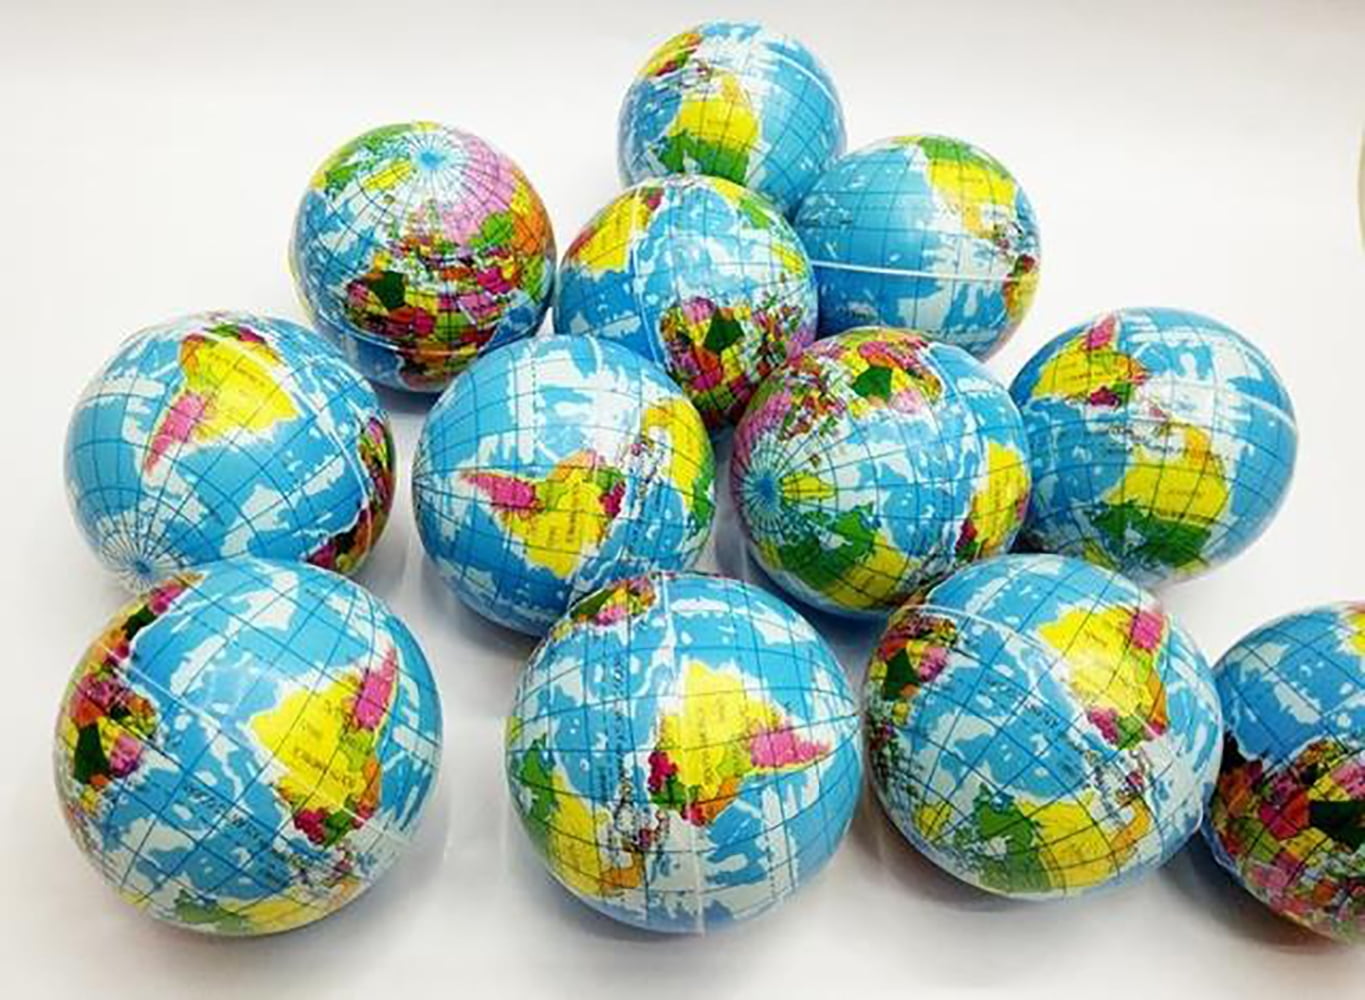 Mini Globe Planet Earth Soft Foam Stress Ball Toy Bulk Educational Novelties for Kids 2.5 Inches Classroom School Party Favors - Liberty Imports 24 Pack 